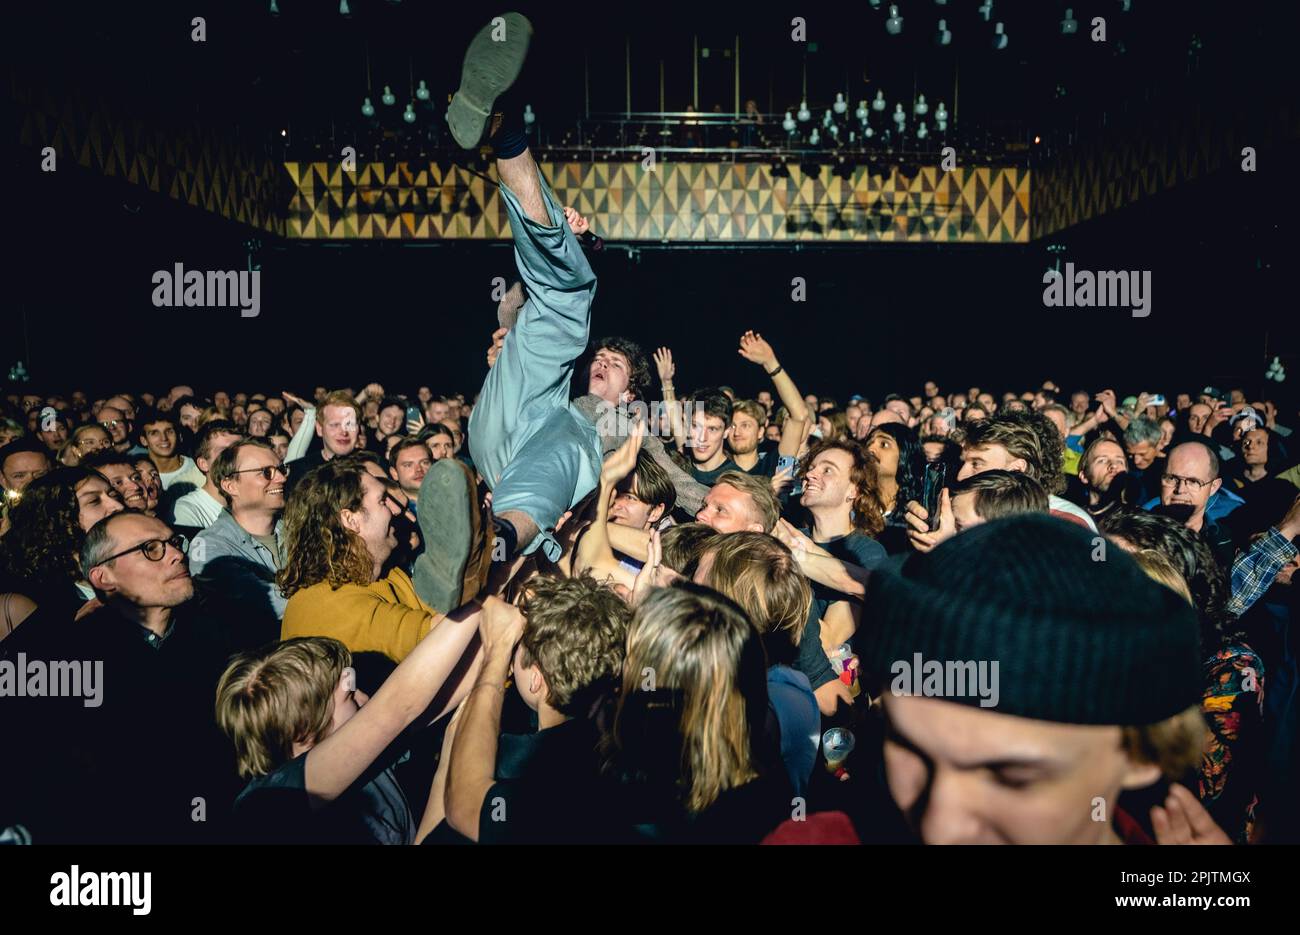 Copenhagen, Denmark. 01st, April 2023. The English post-punk band Shame performs a live concert at VEGA in Copenhagen. Here vocalist Charlie Steen is seen crowd surfing. (Photo credit: Gonzales Photo - Joe Miller). Stock Photo